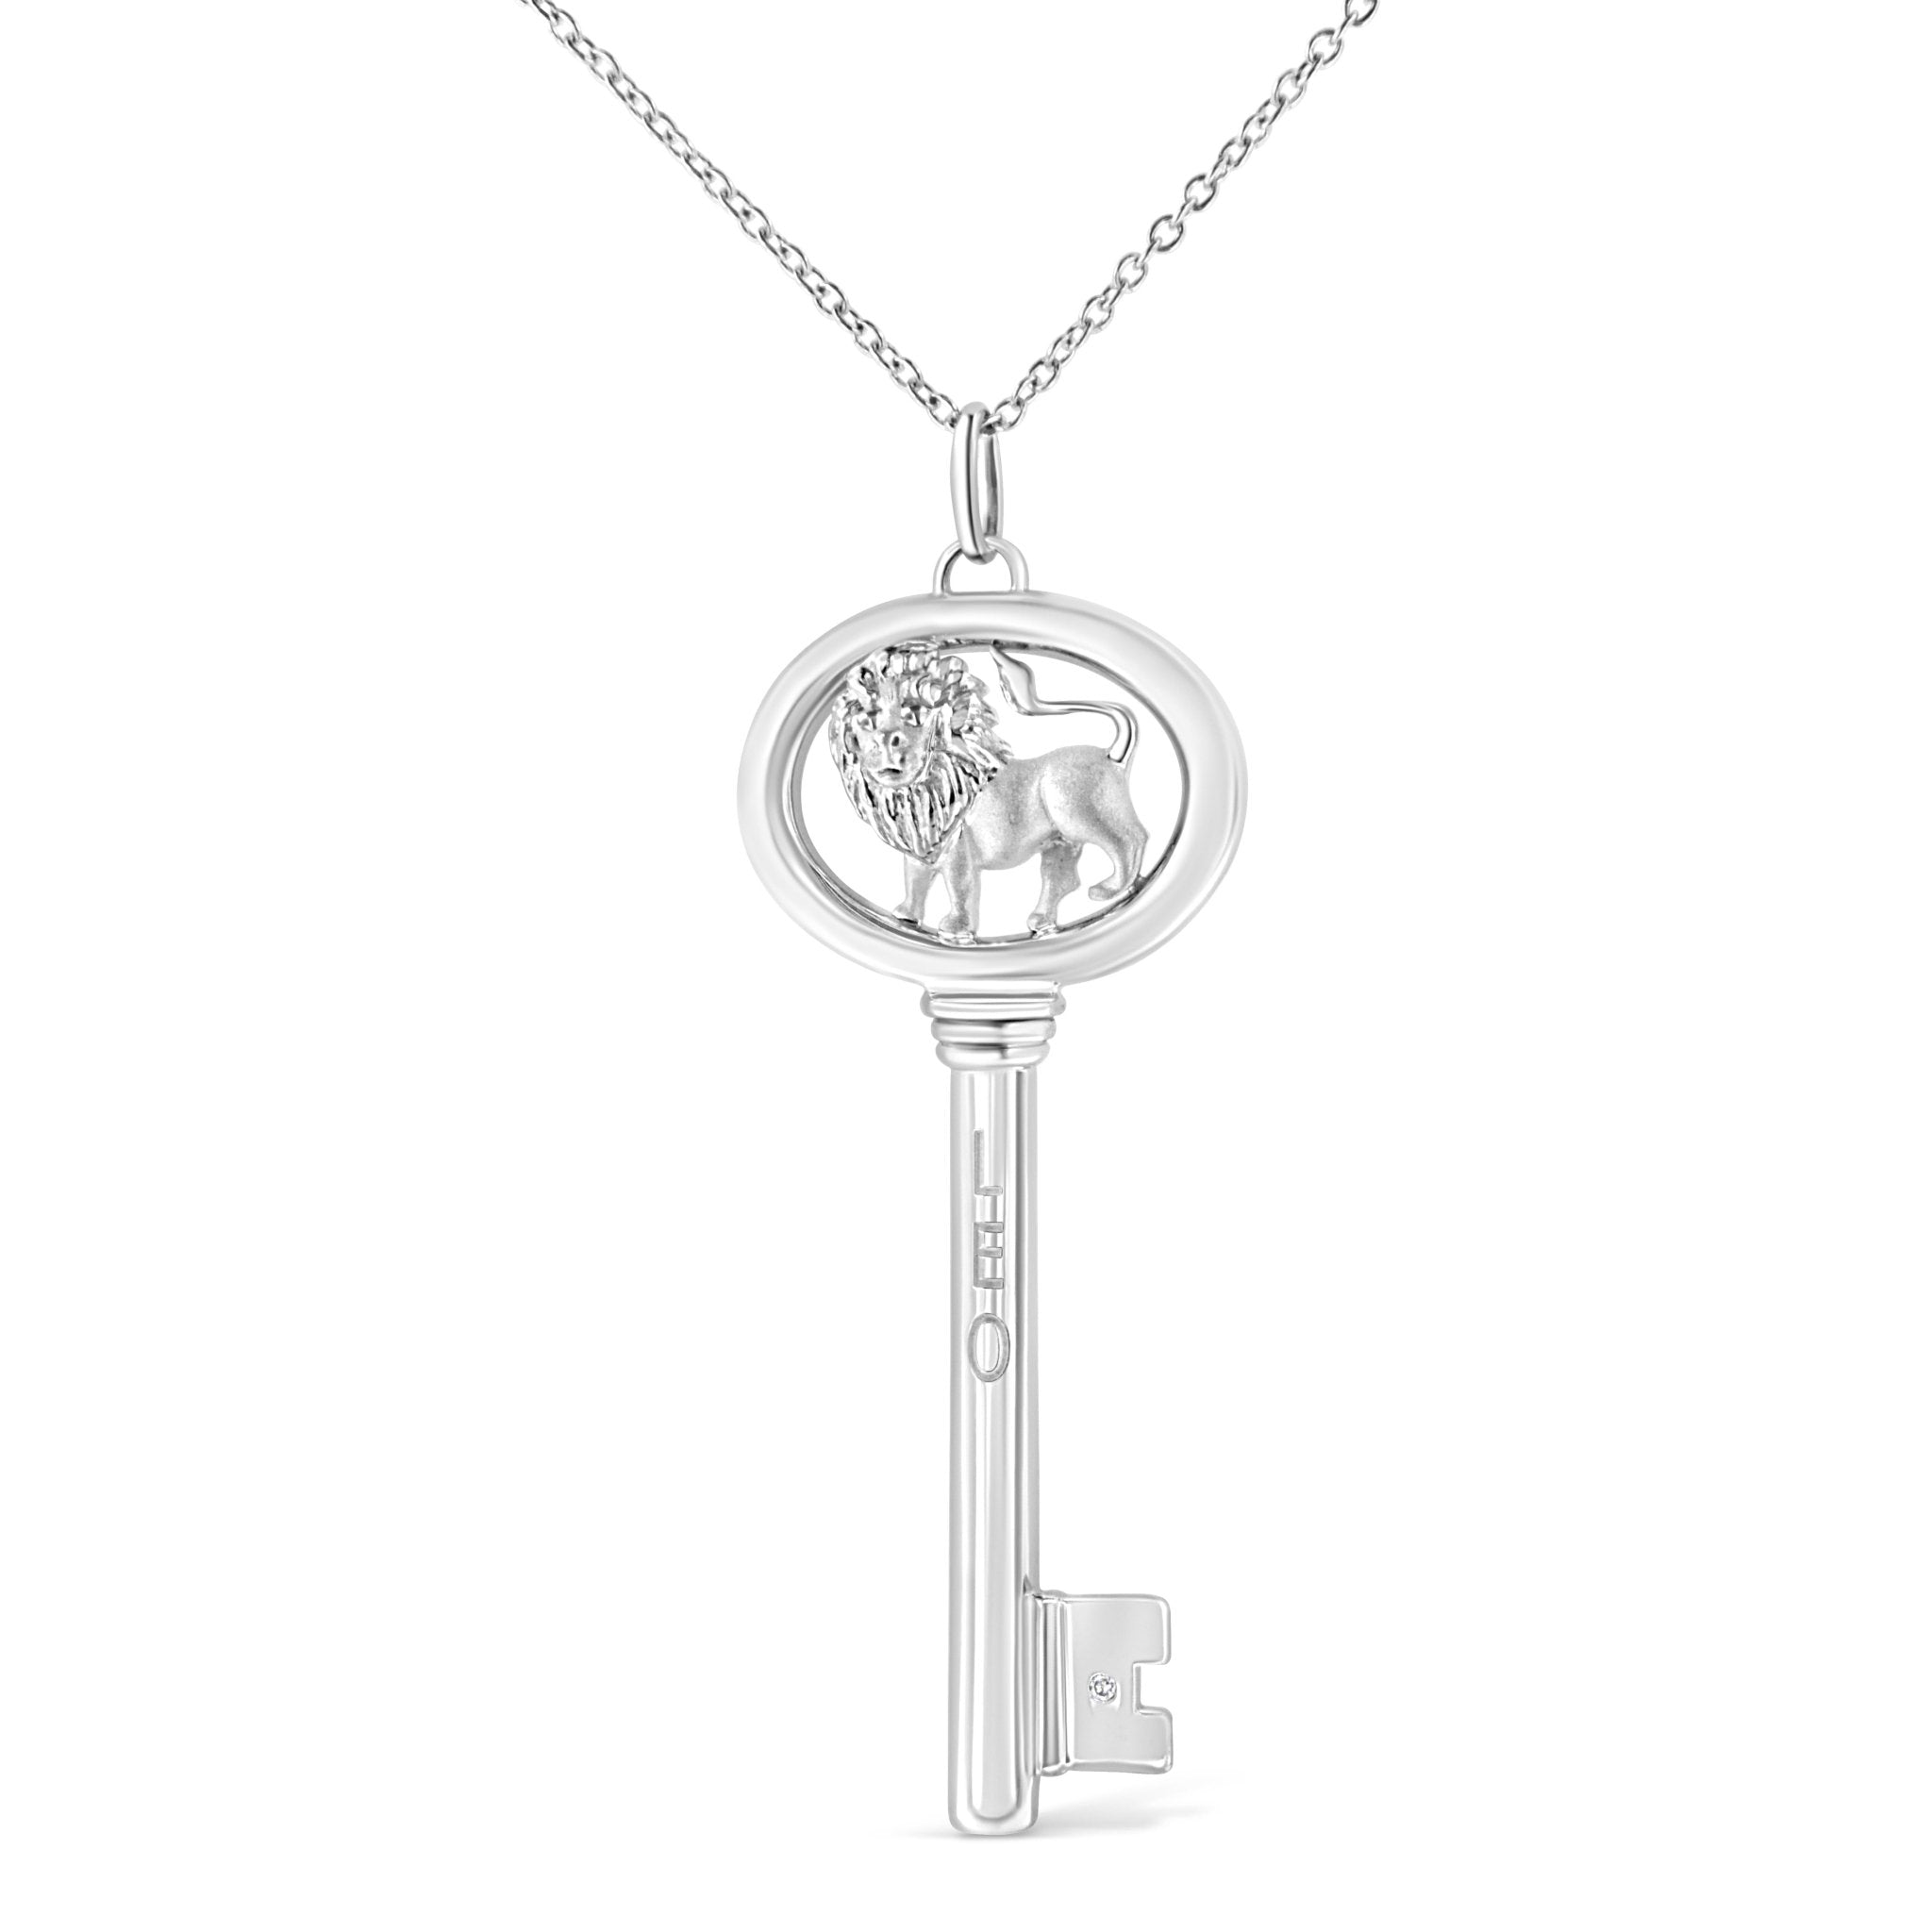 .925 Sterling Silver Diamond Accent Leo Zodiac Key 18" Pendant Necklace (K-L Color, I1-I2 Clarity) - Tuesday Morning-Pendant Necklace